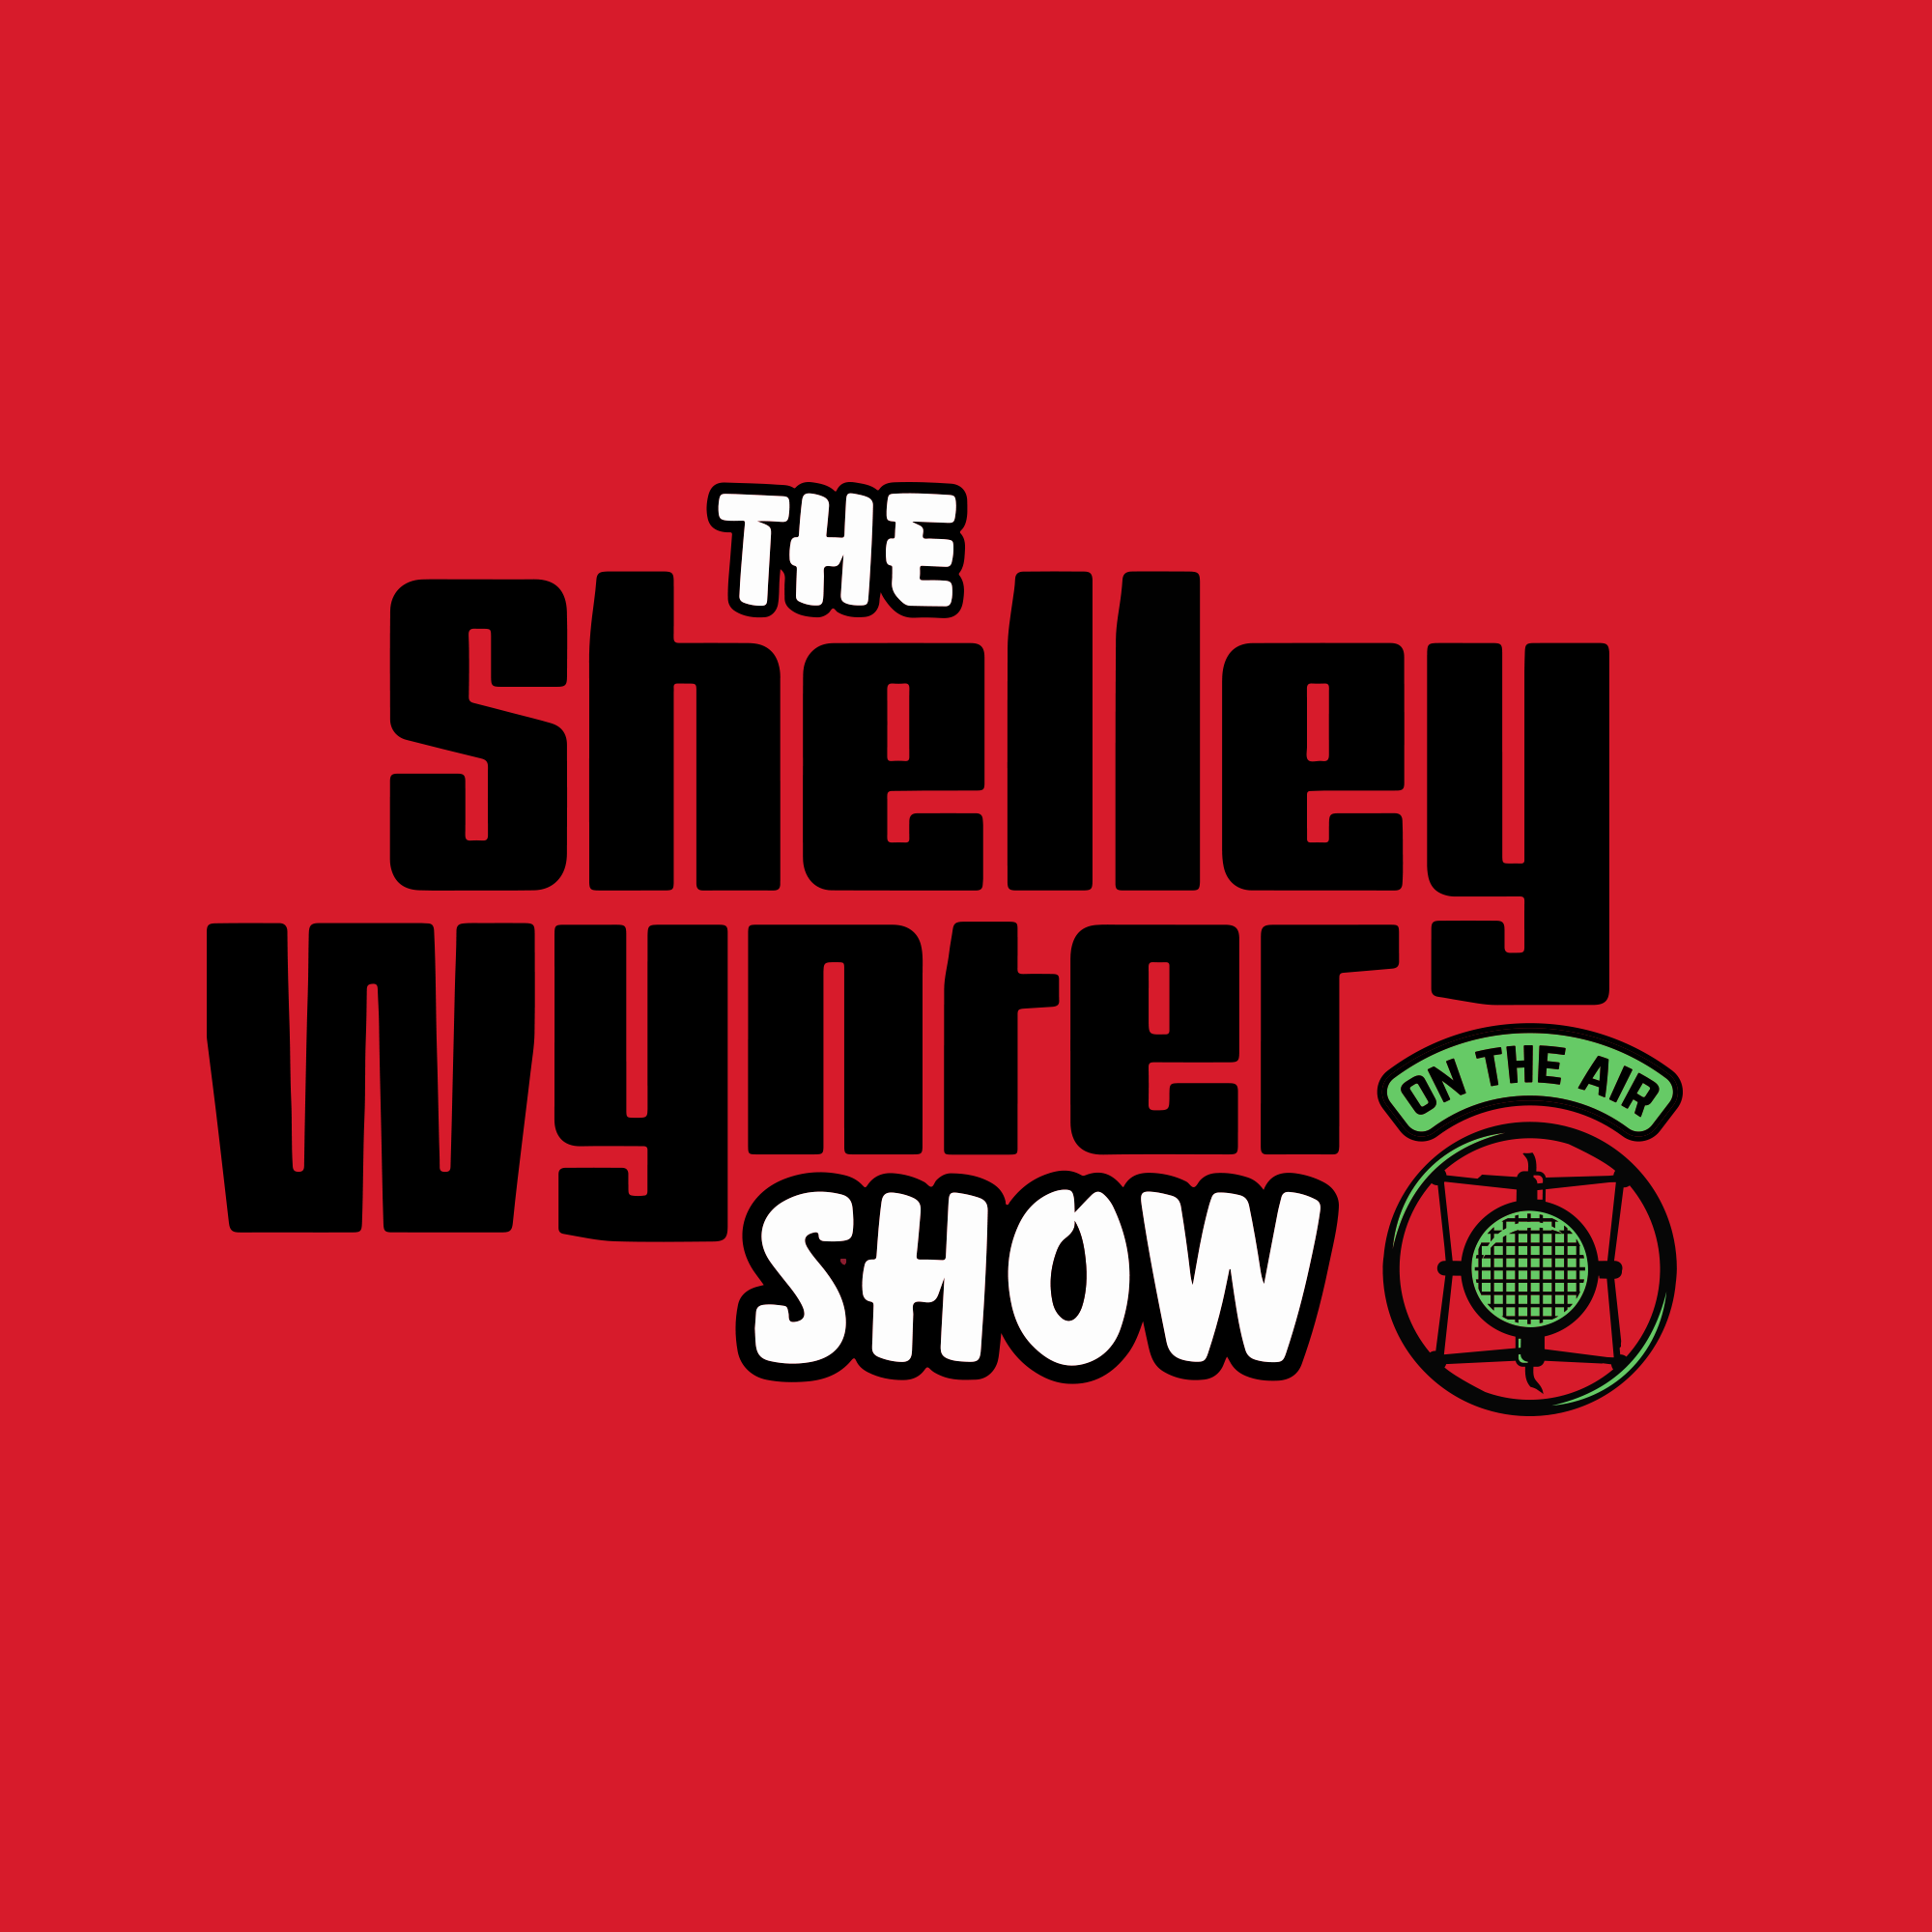 The Shelley Wynter Show